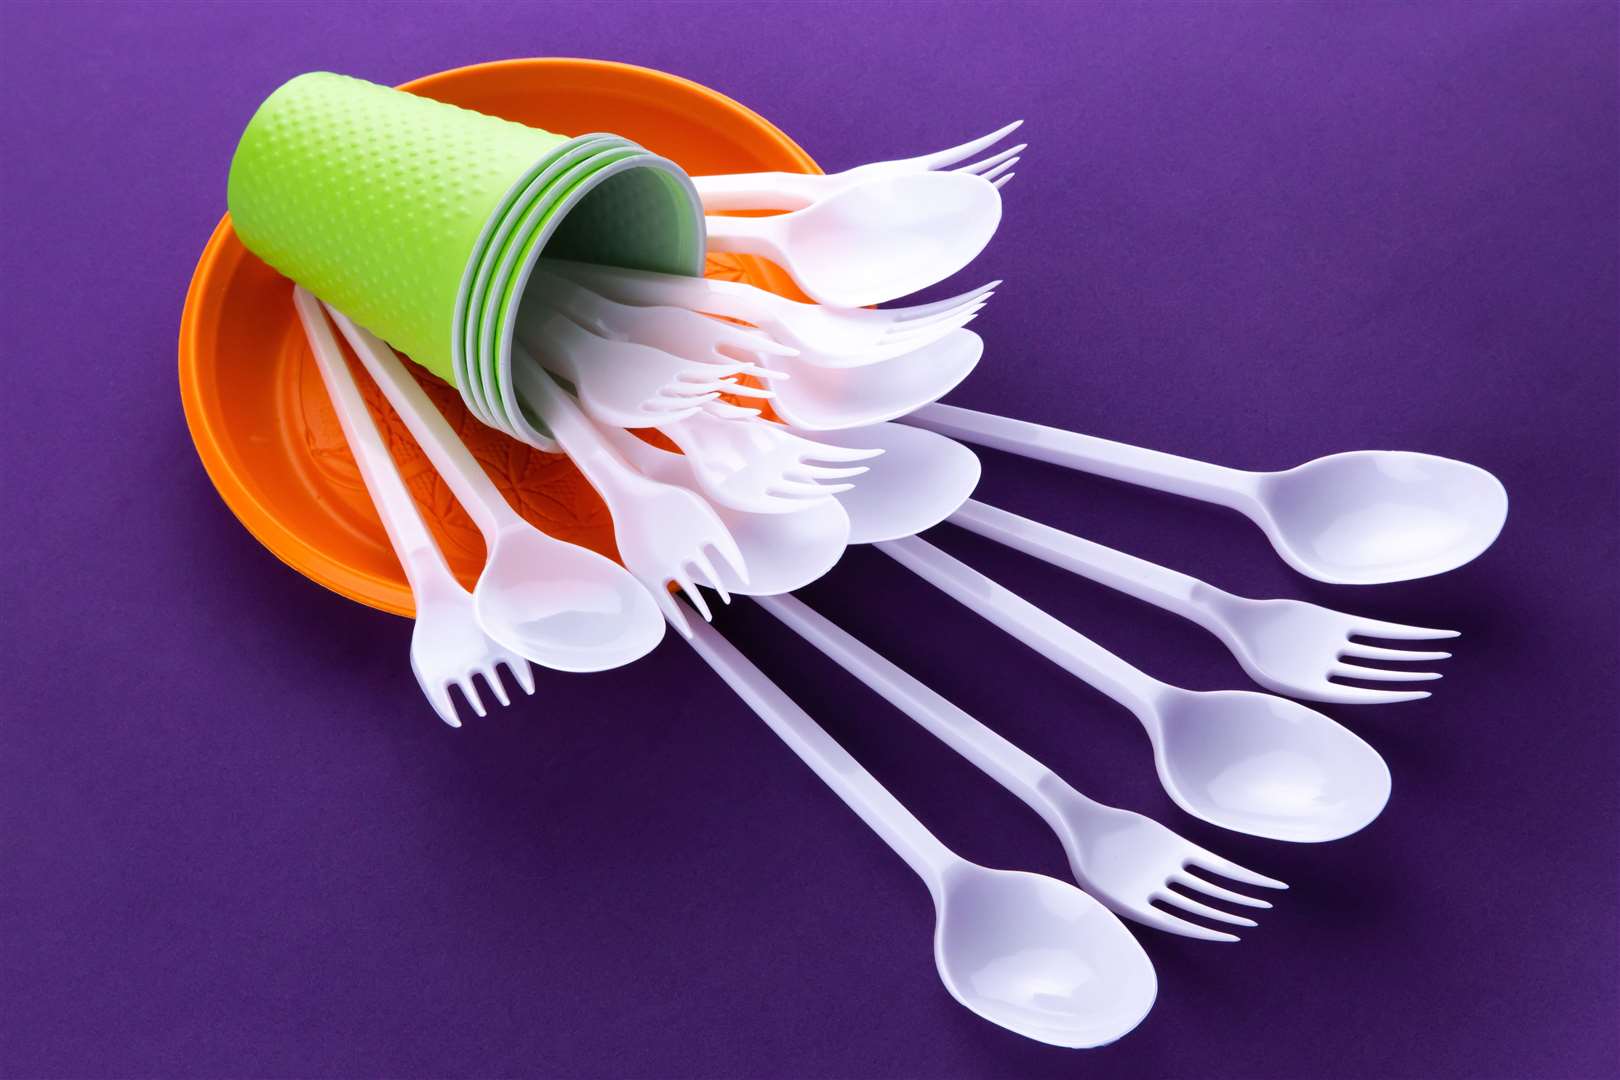 Single use plastic cutlery and table items will become a thing of the past after June.